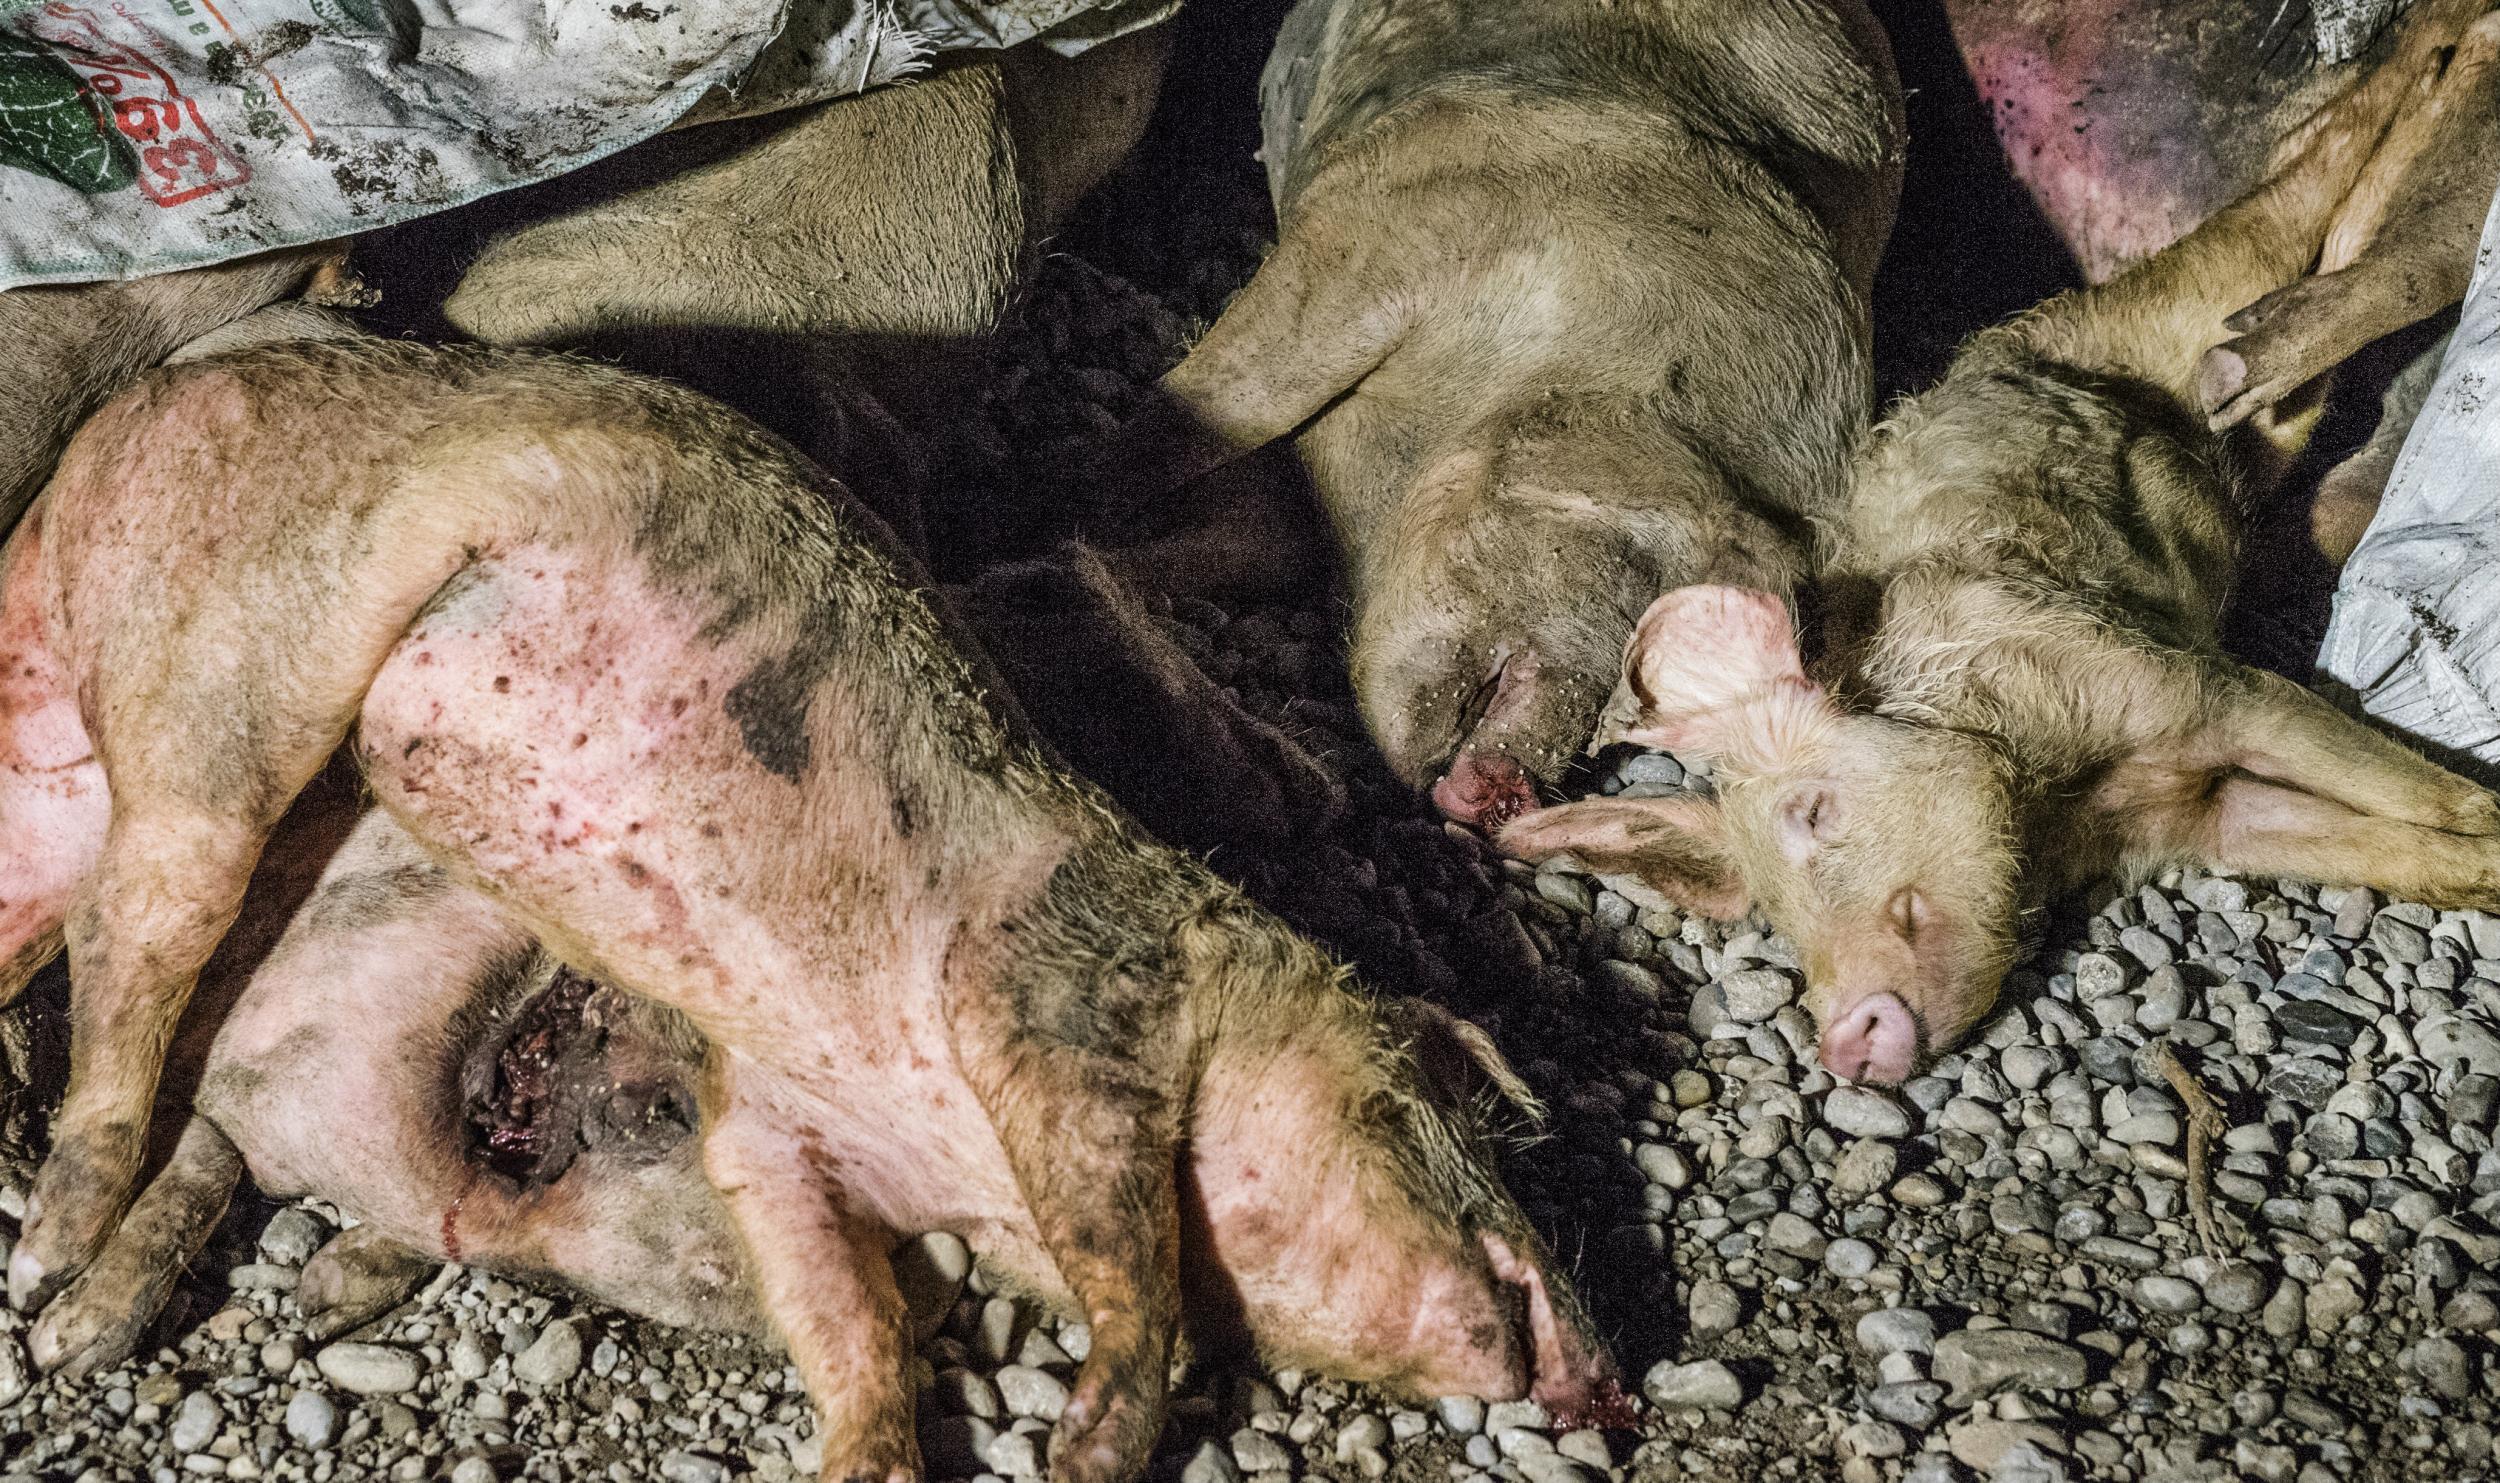 &#13;
Bodies of diseased pigs were left dumped close to living animals (LAV)&#13;